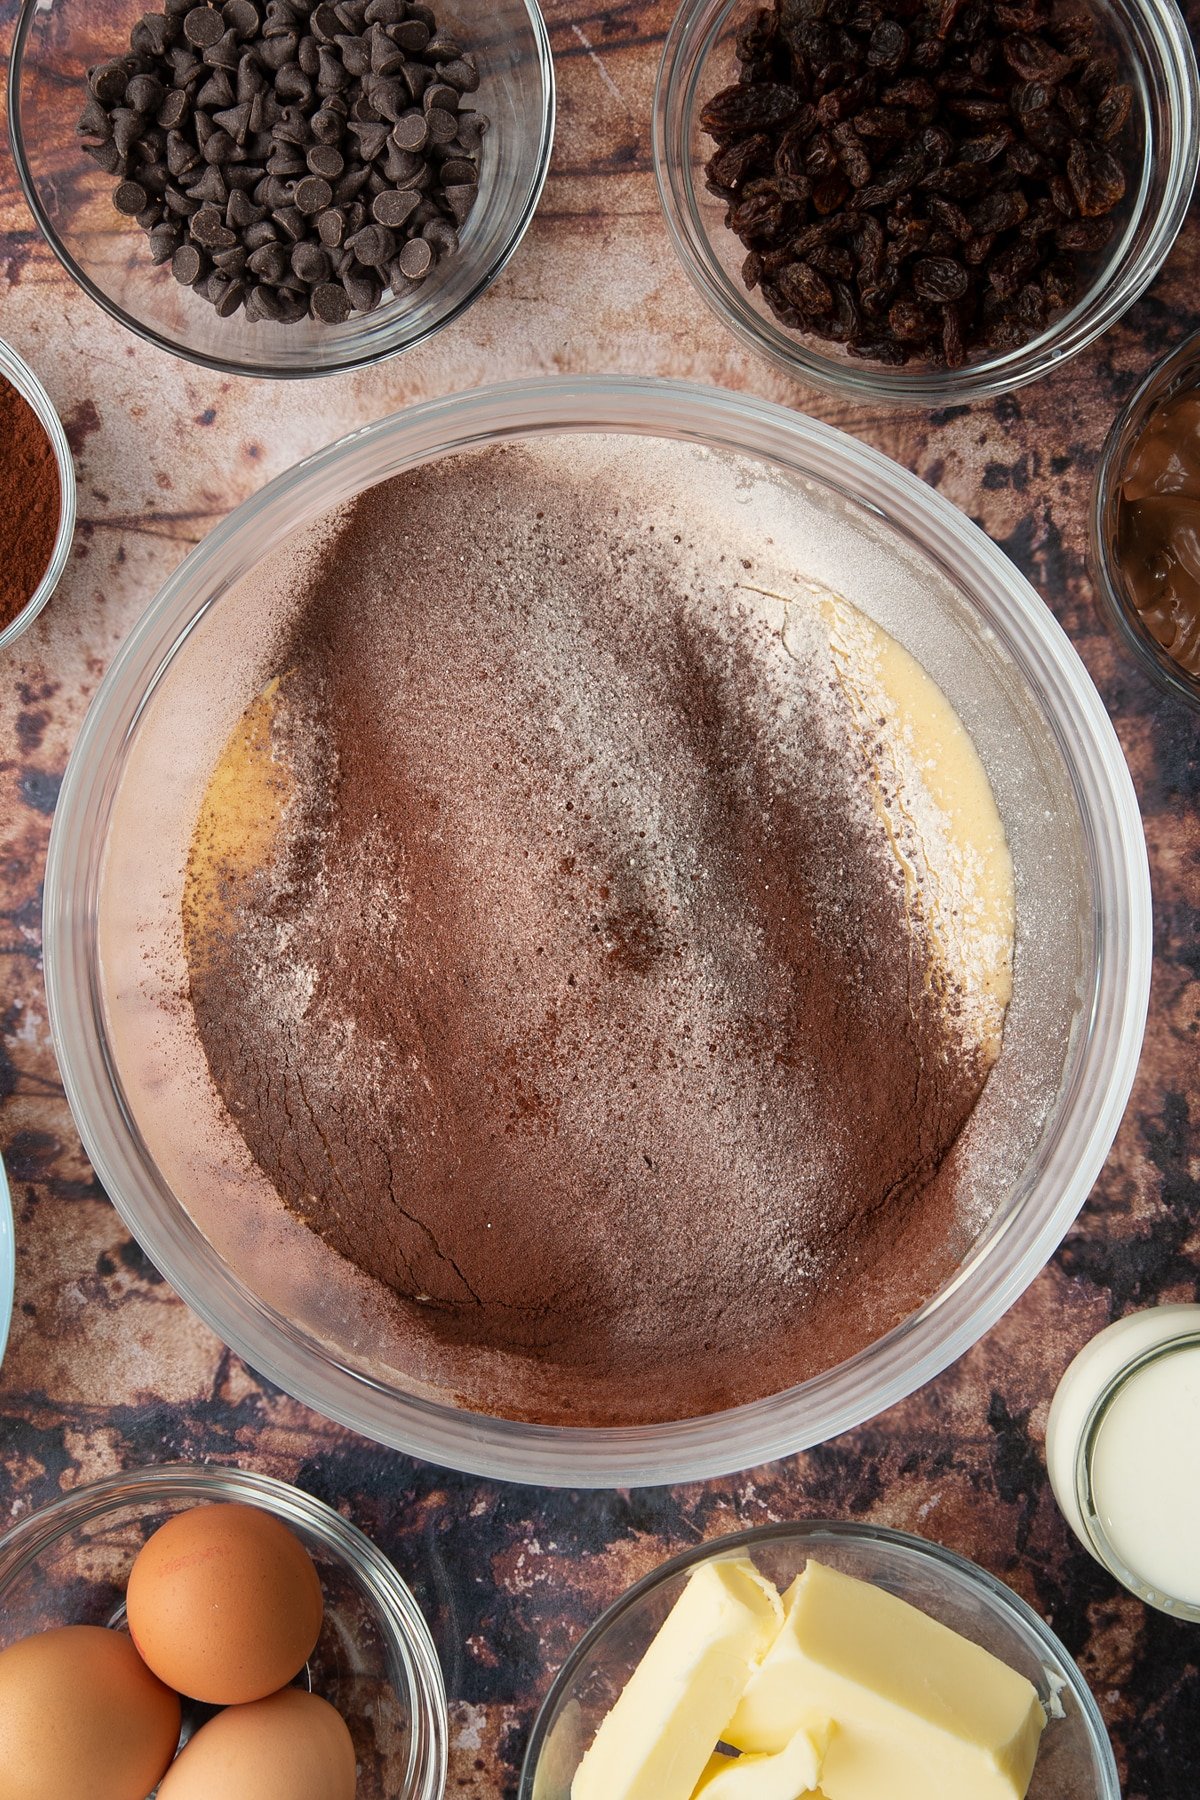 Butter, oil, sugar and eggs in a bowl with flour and cocoa on top. Ingredients to make chocolate raisin muffins surround the bowl.